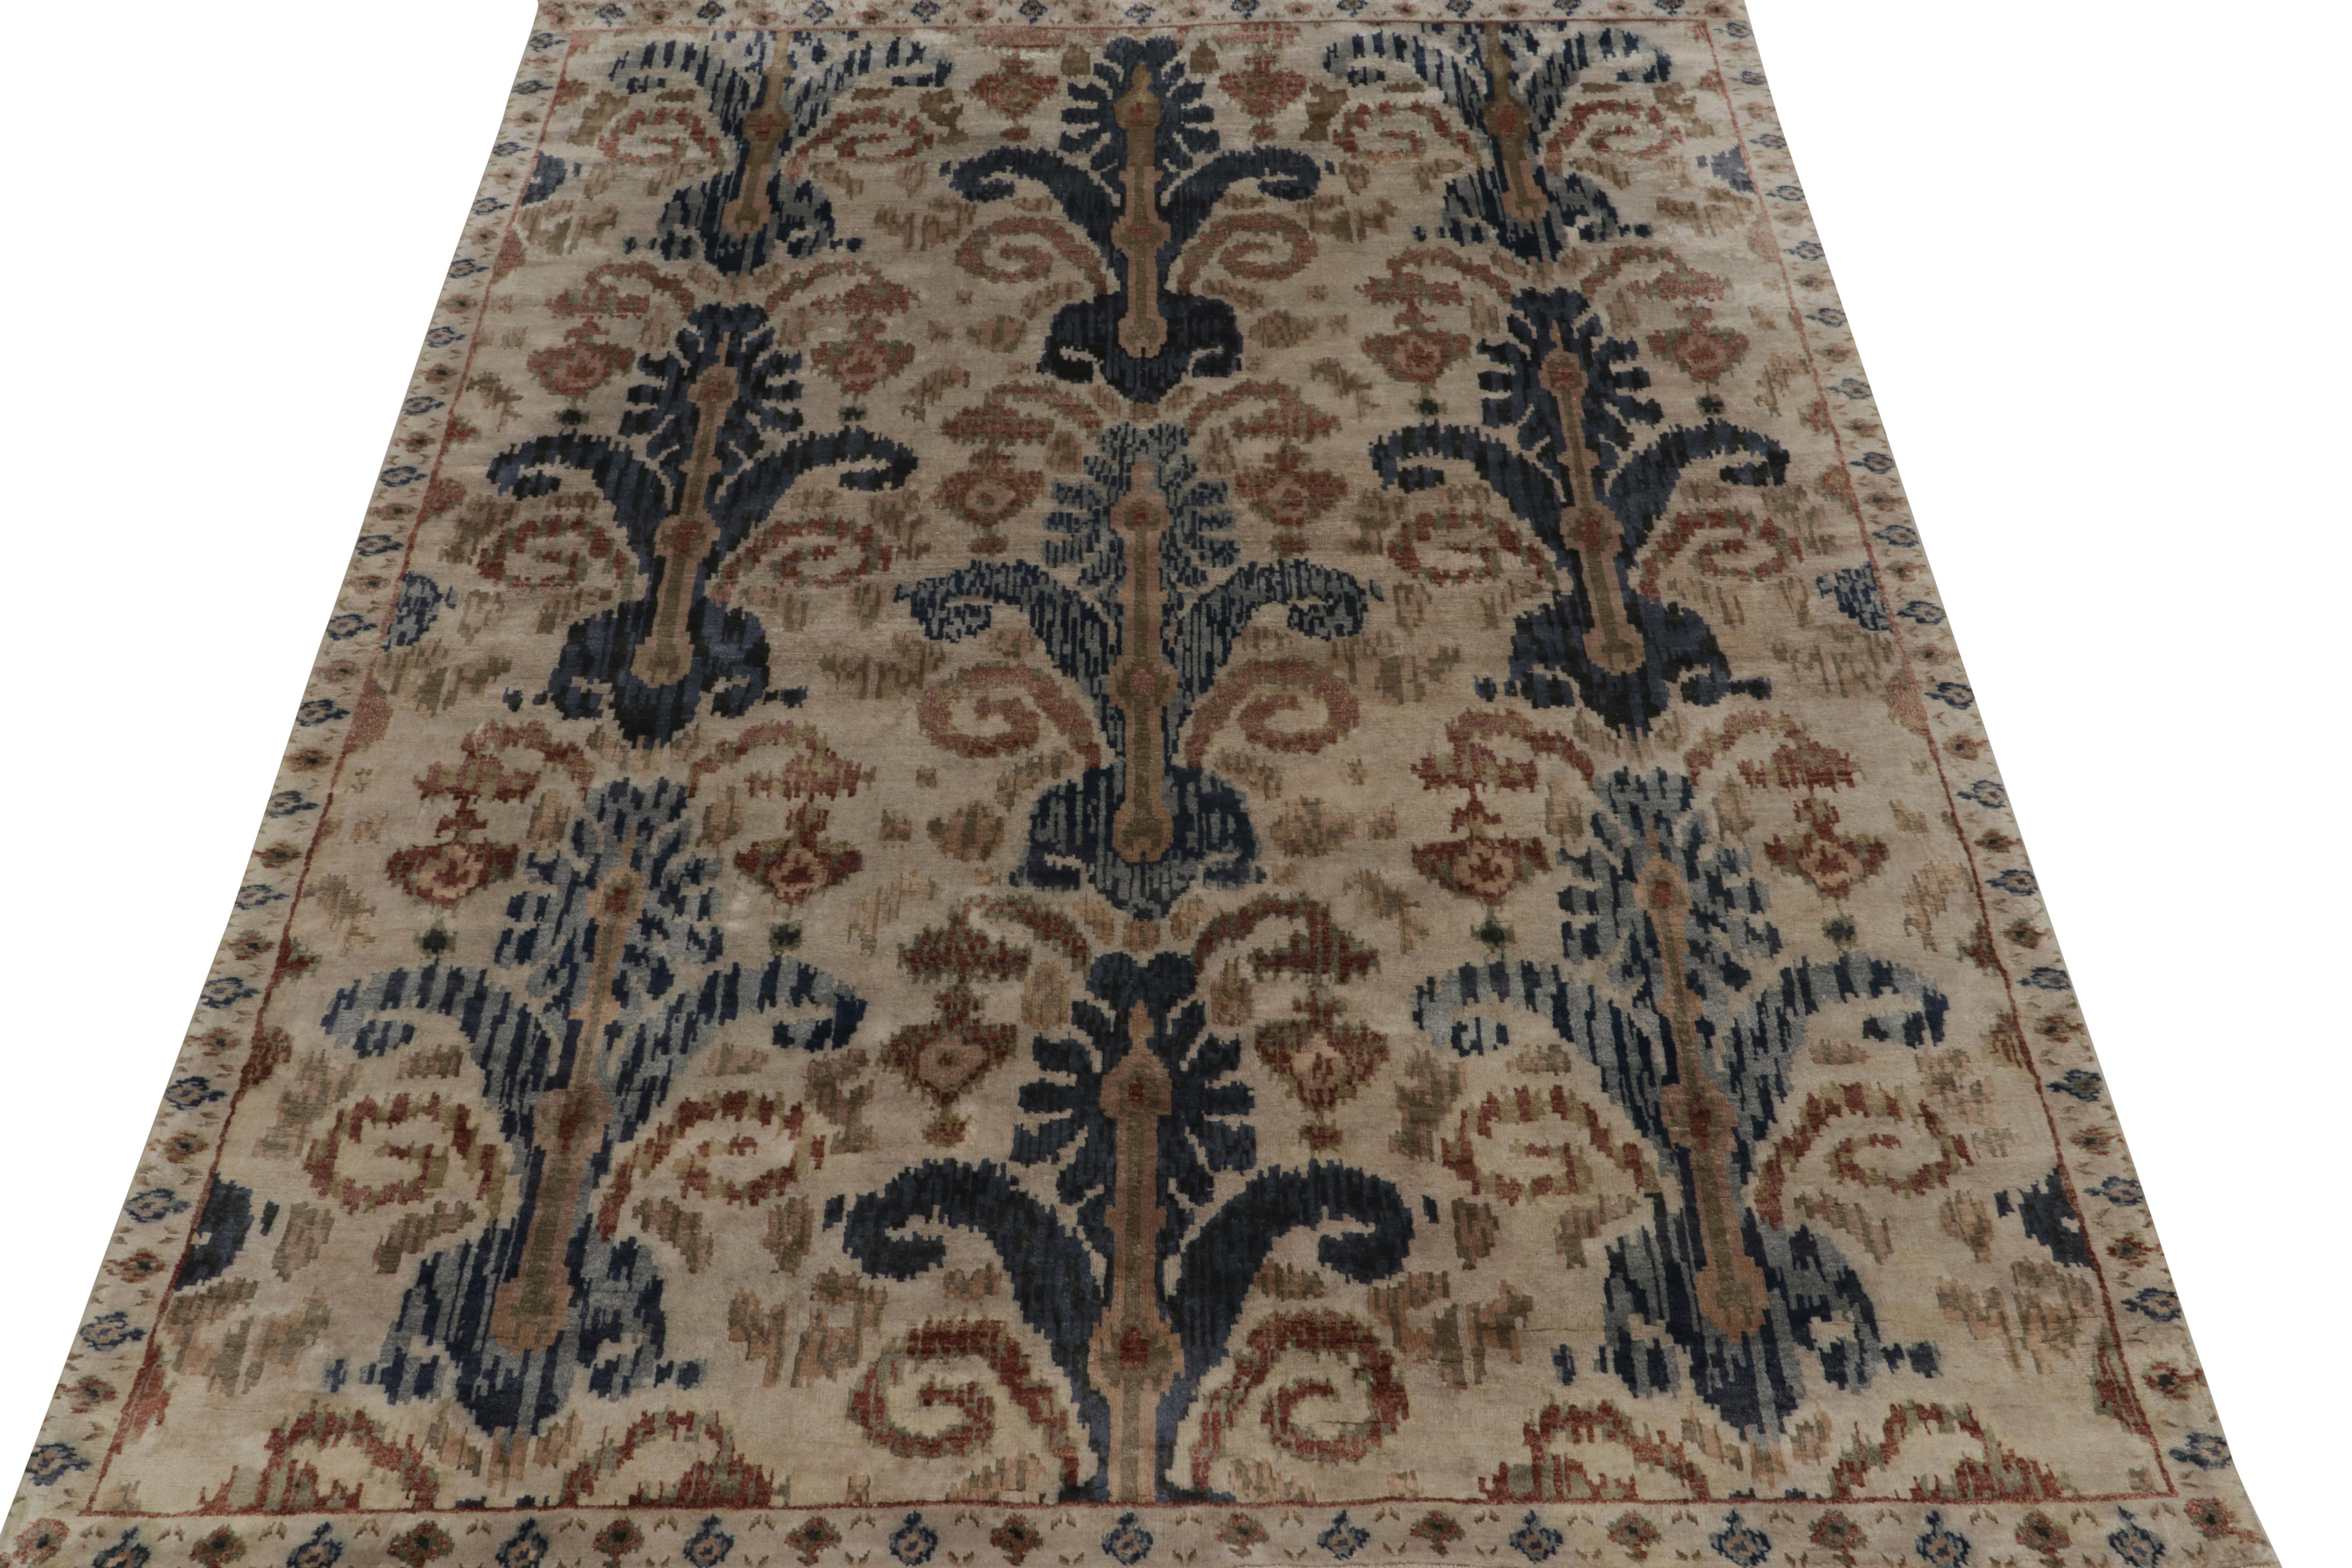 Indian Rug & Kilim’s Ikats Style rug in Blue and Beige-Brown on Ivory For Sale